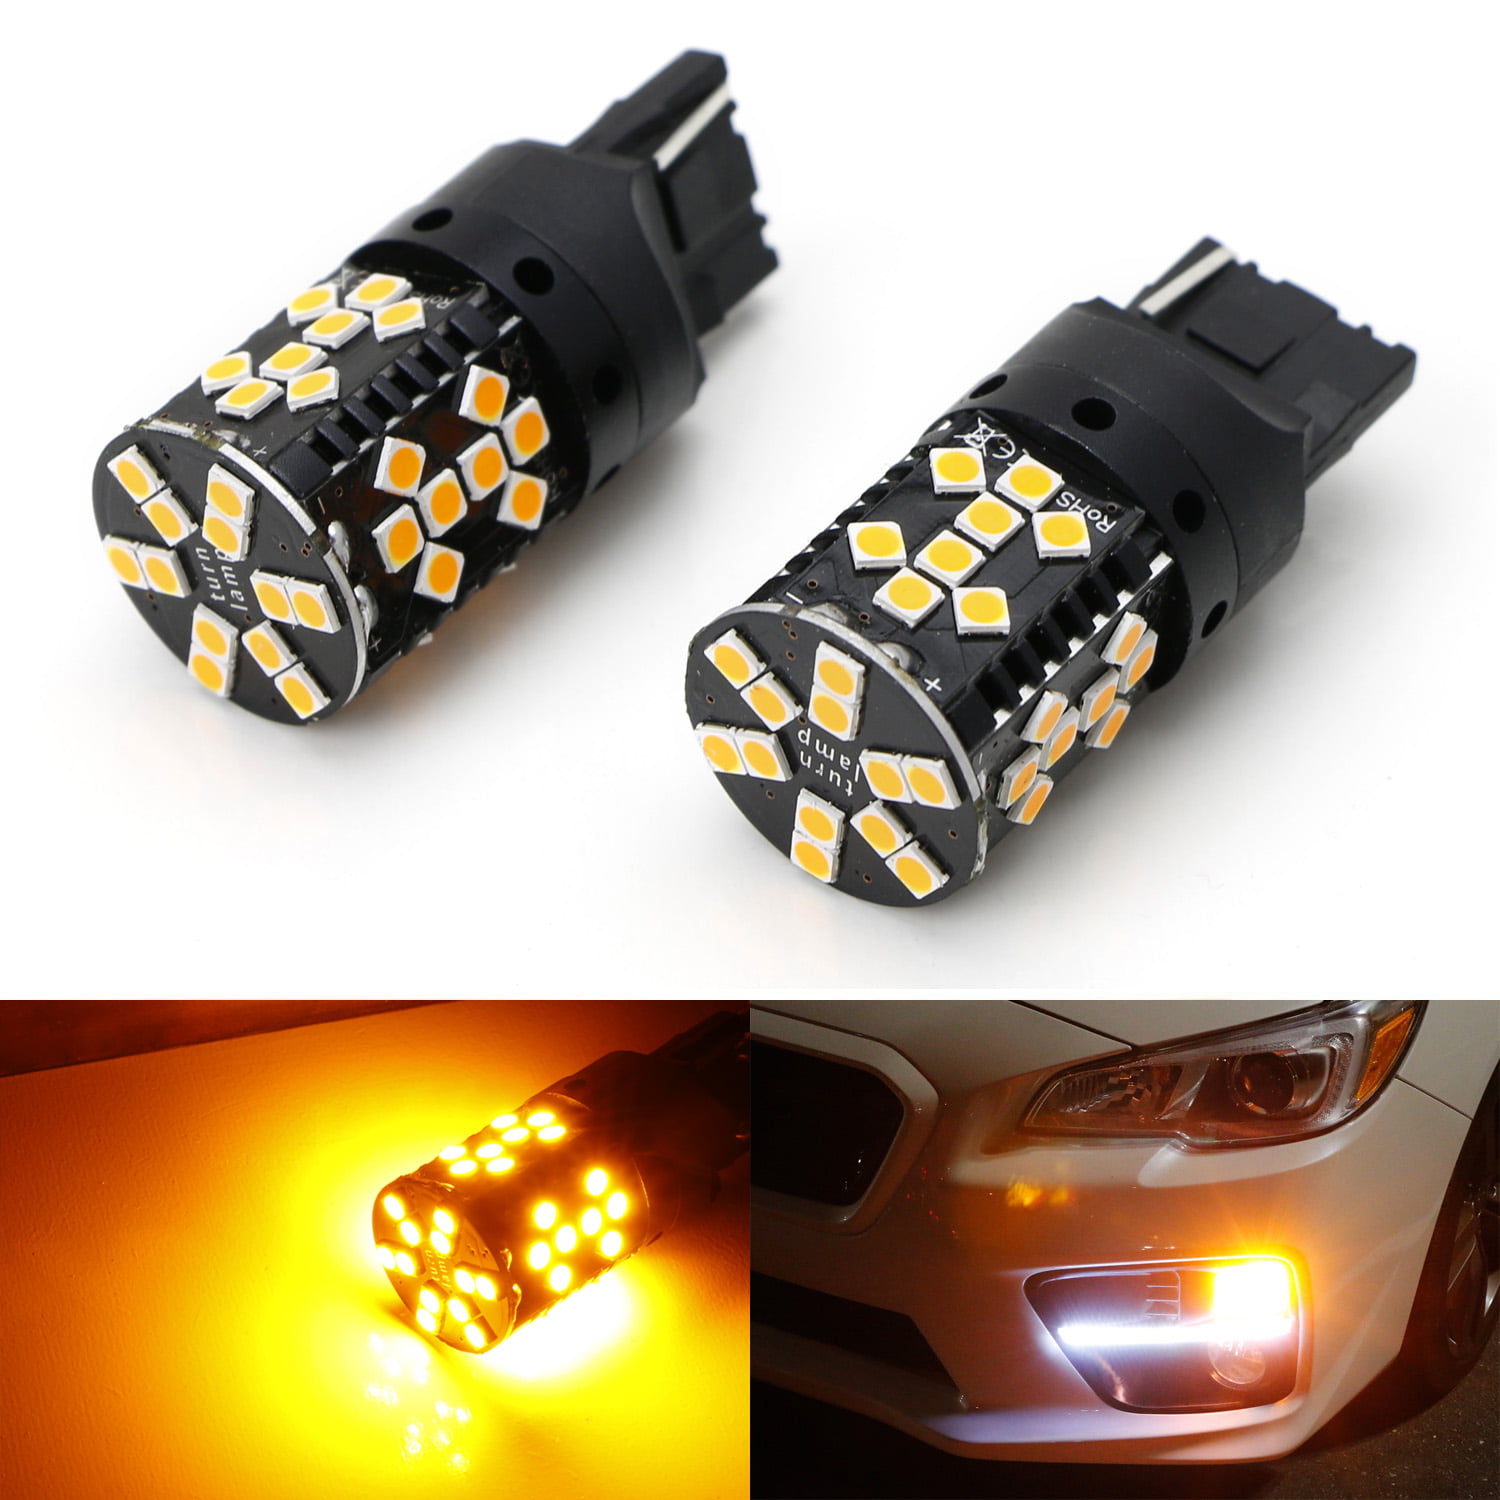 No Hyper Flash 24W High Power Amber 7440 W21W T20 LED Replacement Bulbs For Car Front or Rear Turn Signal Lights iJDMTOY iJDMTOY Auto Accessories Replace W21W 7440 7444 922A Corner Bulbs 2 No Load Resistor Required 